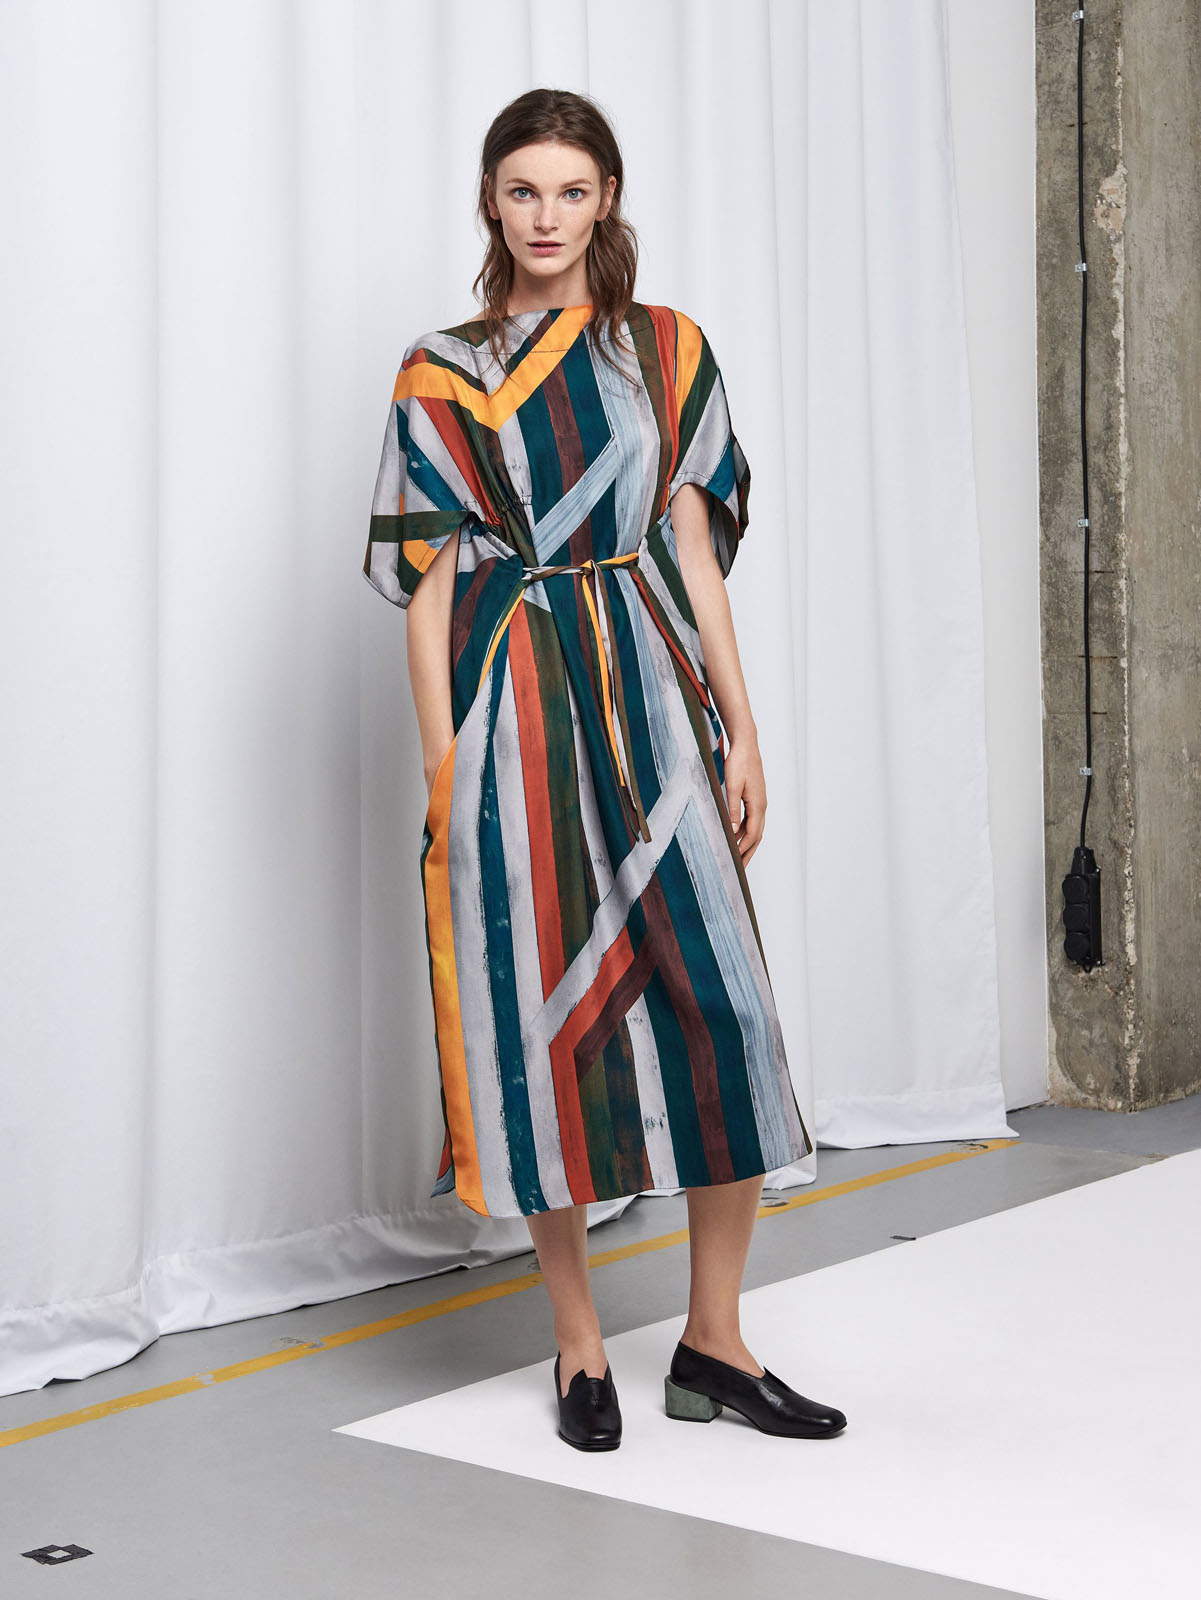 132 Most Inspiring Looks from Resort 2018 Runway Collections | Style Tomes